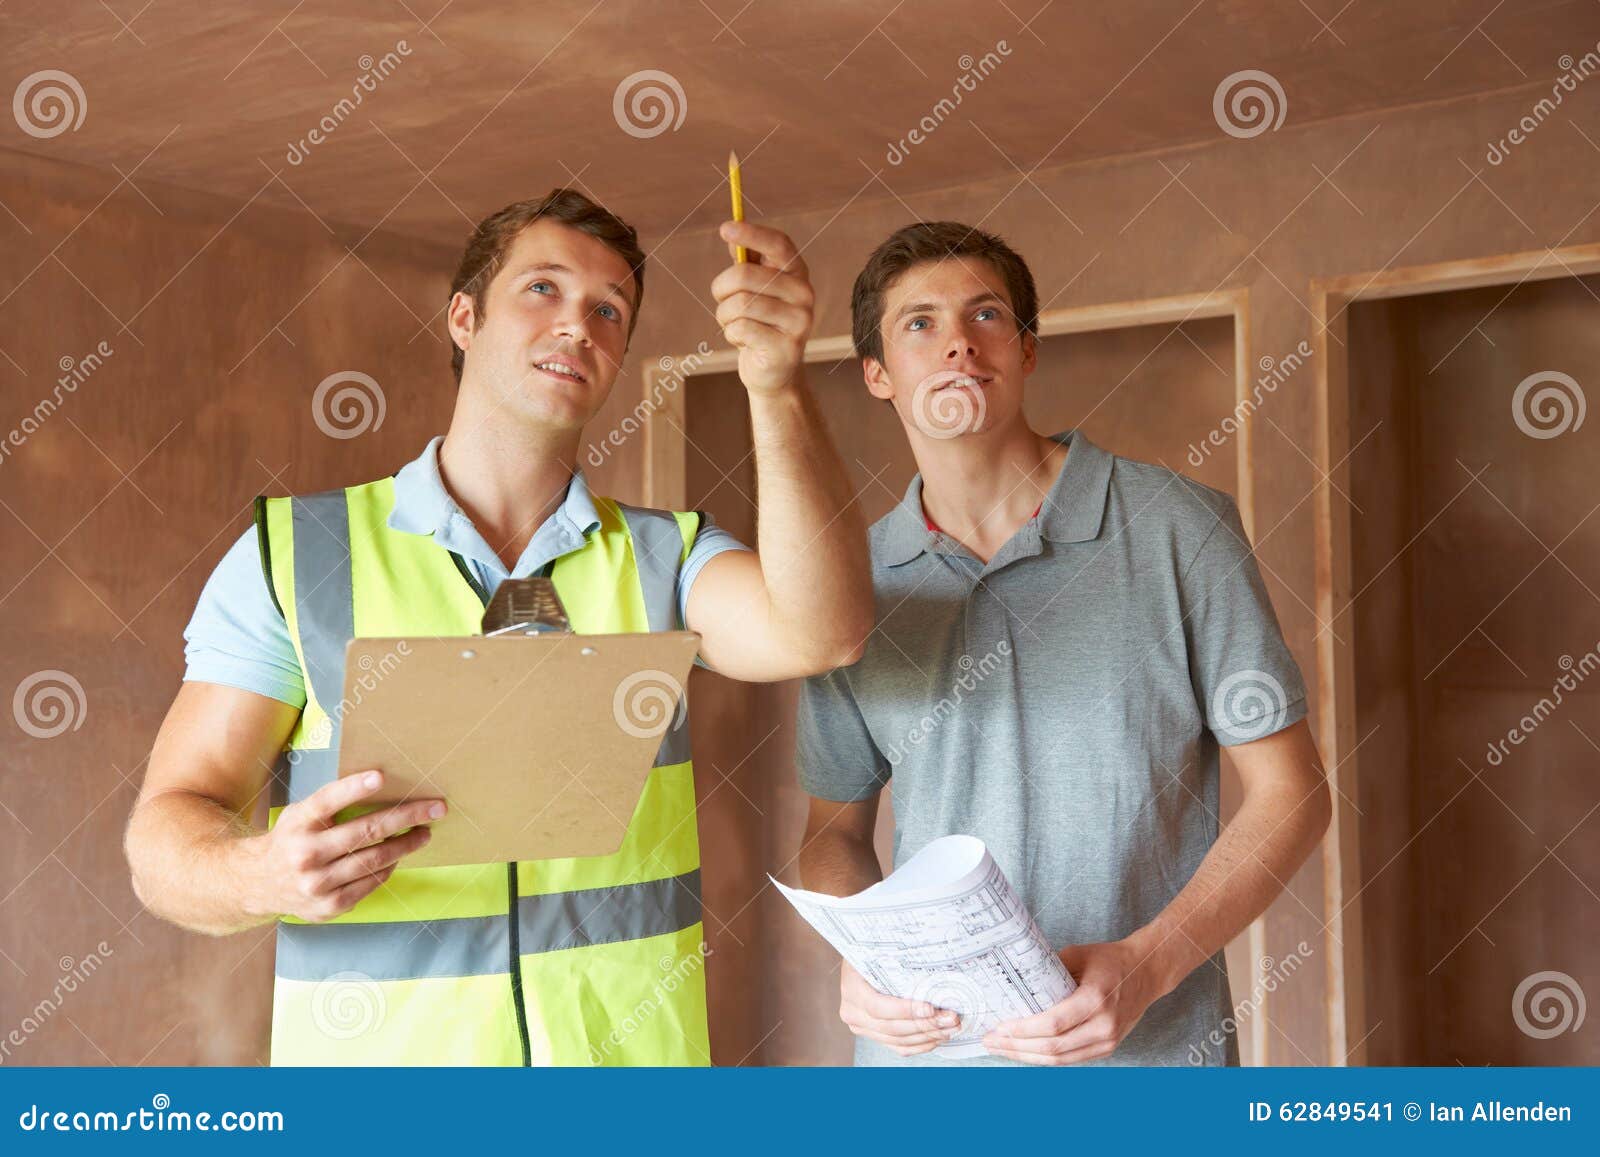 builder and inspector looking at new property